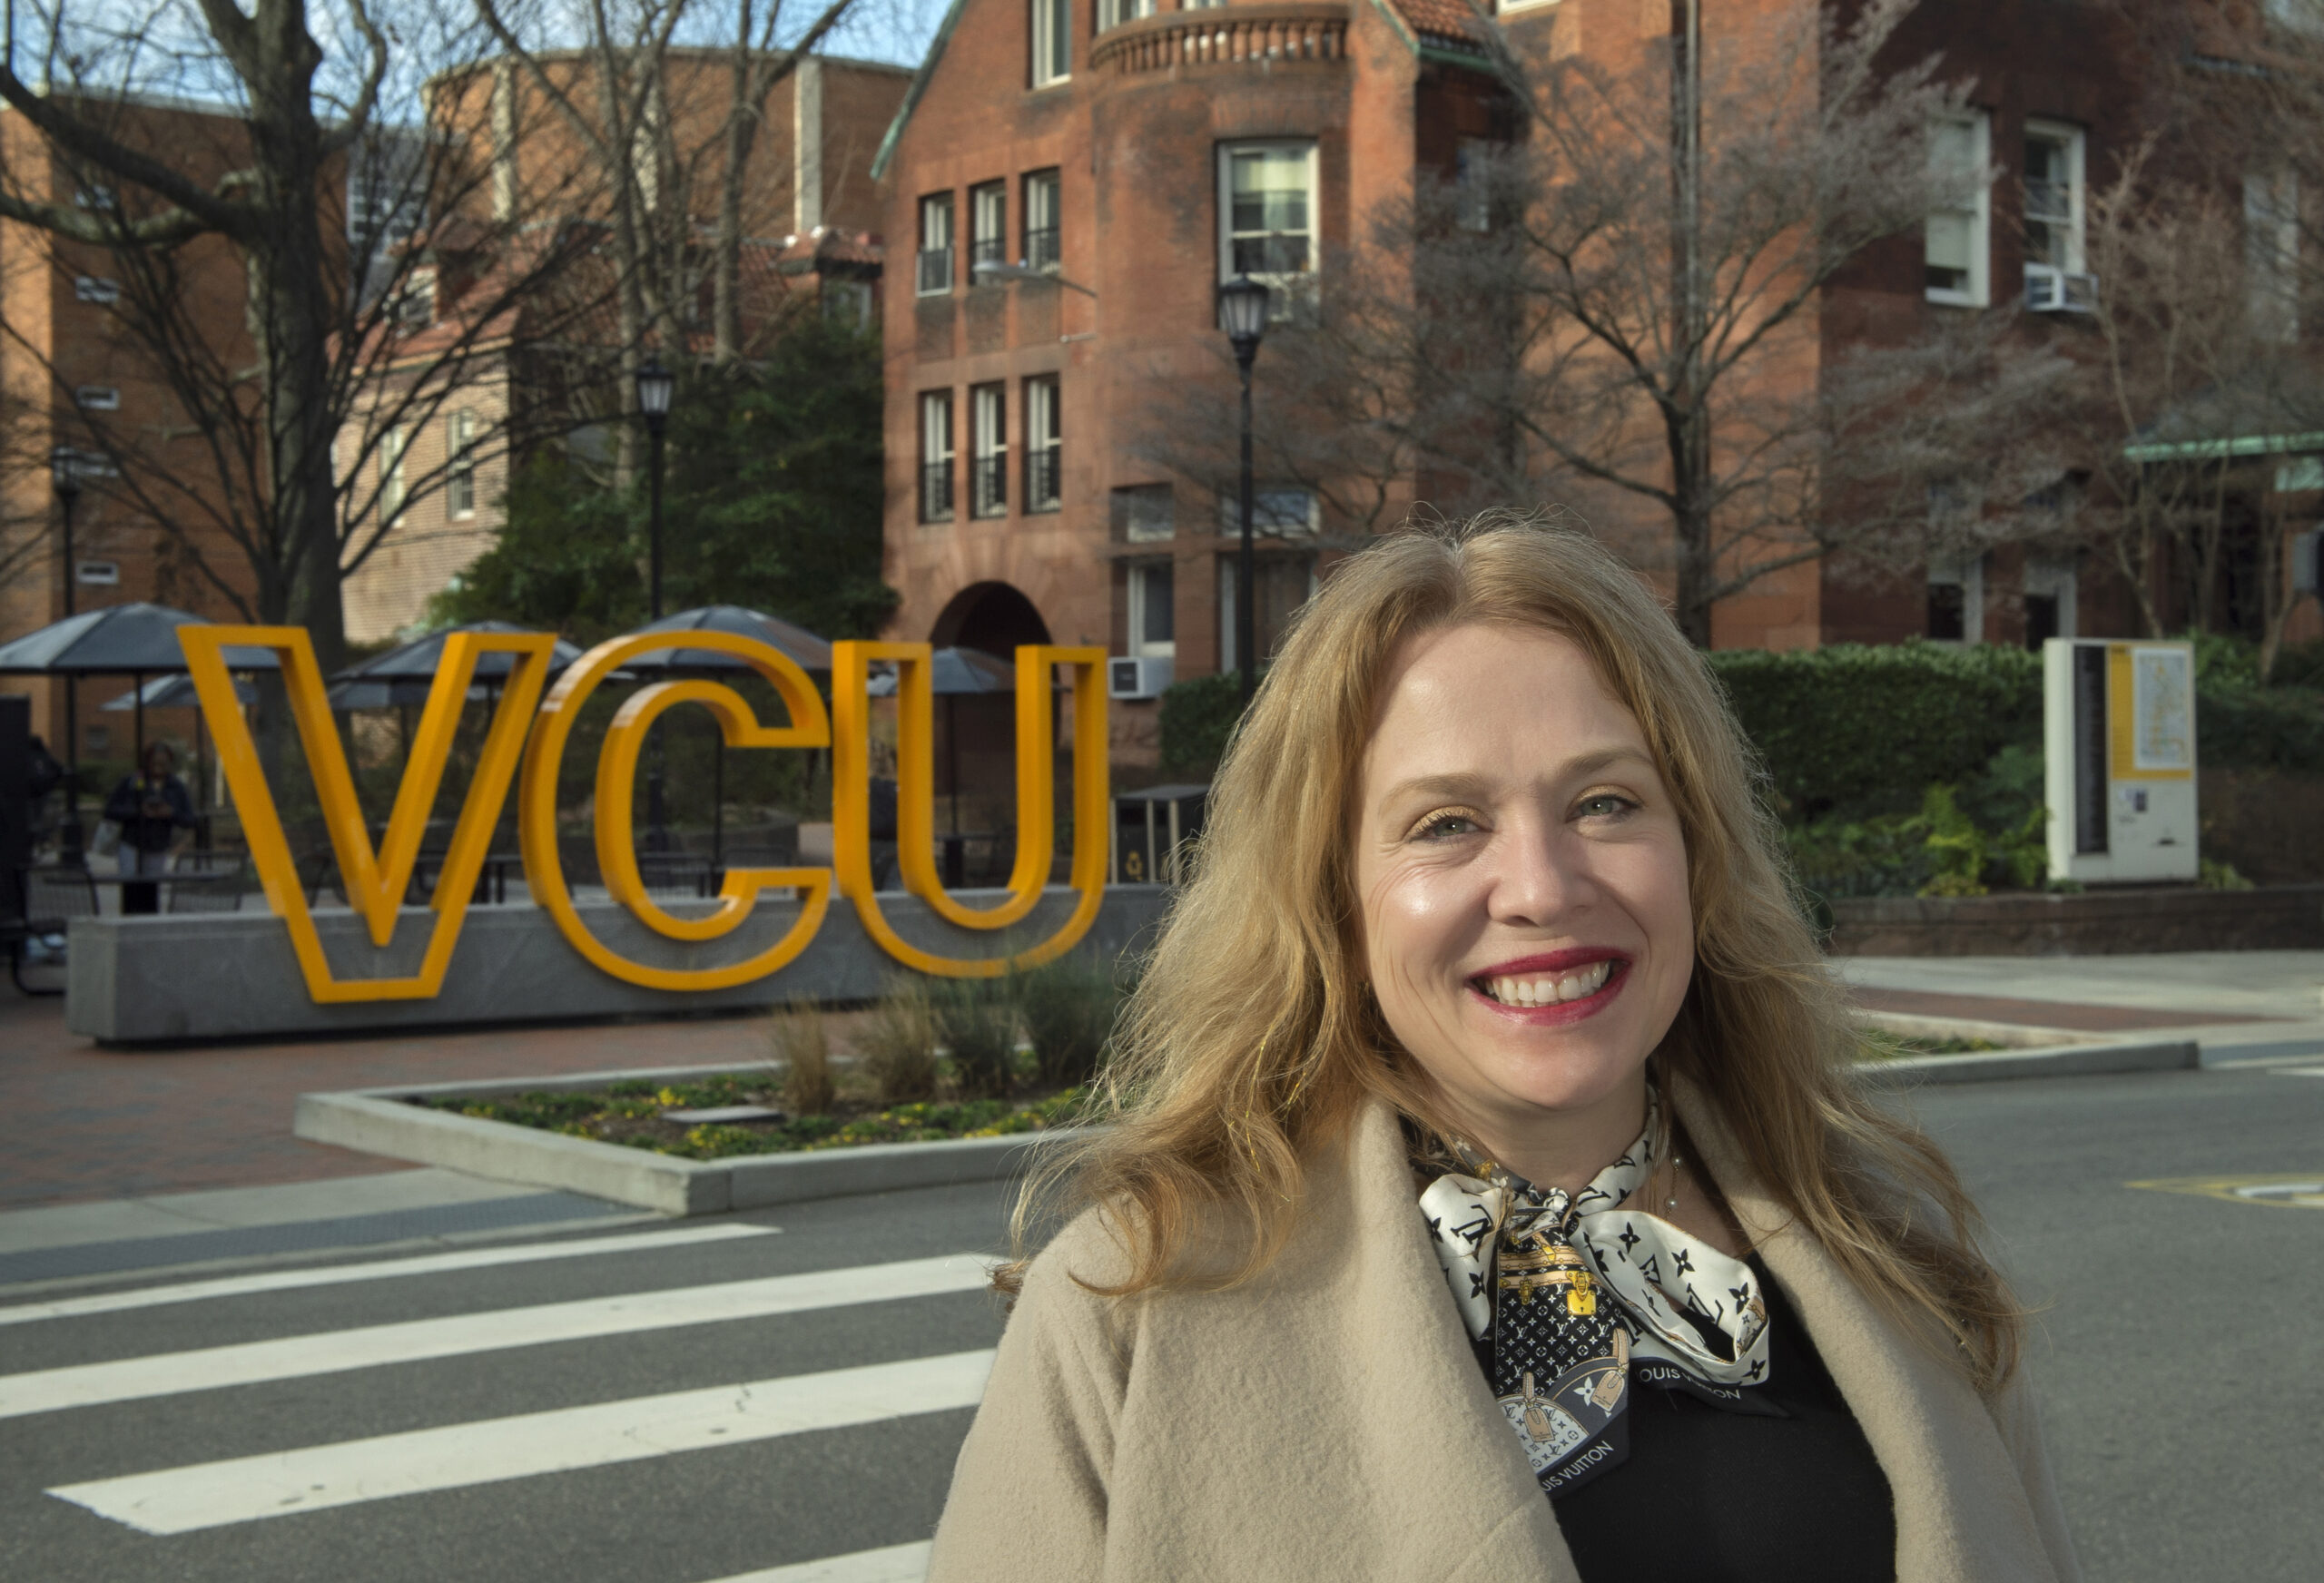 IIE's Senior International Officer of the year poses on her campus, Virginia Commonwealth University.